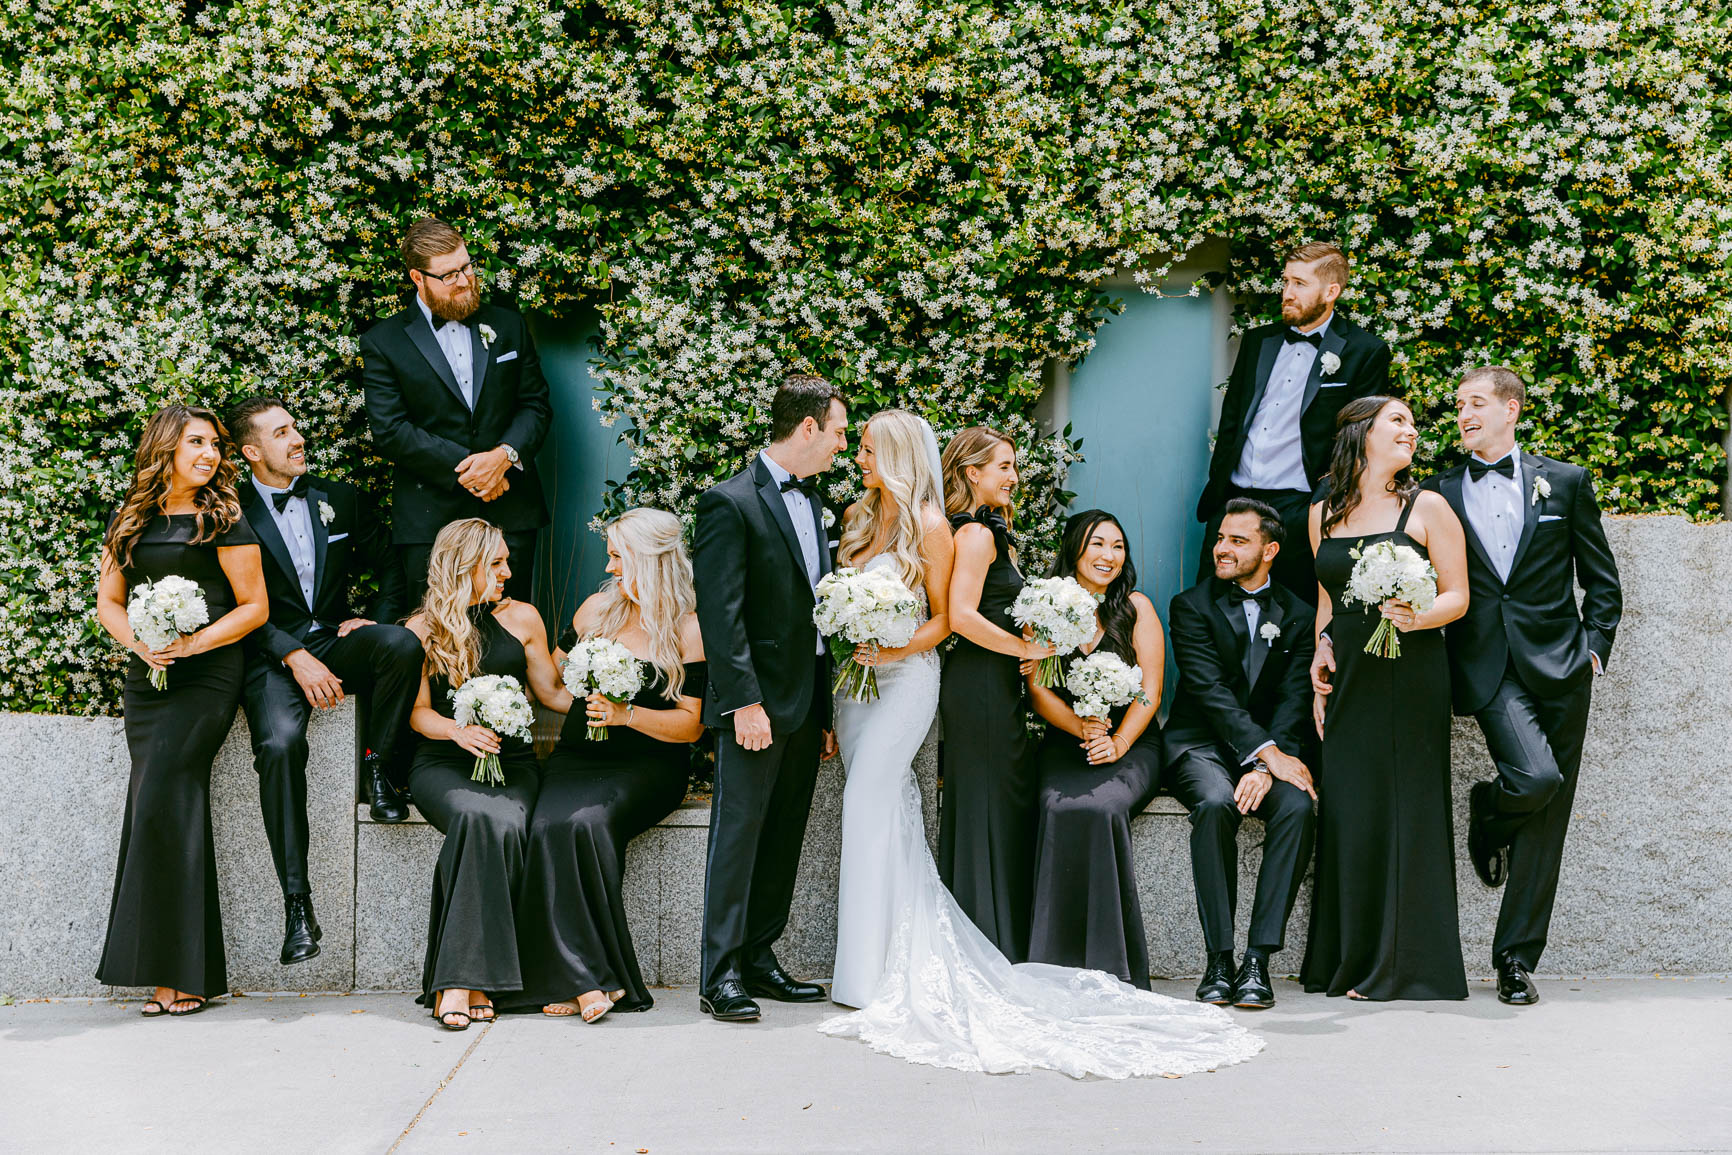 elegant bridal party photos in uptown Charlotte nc shot by Nhieu Tang Photography | nhieutang.com